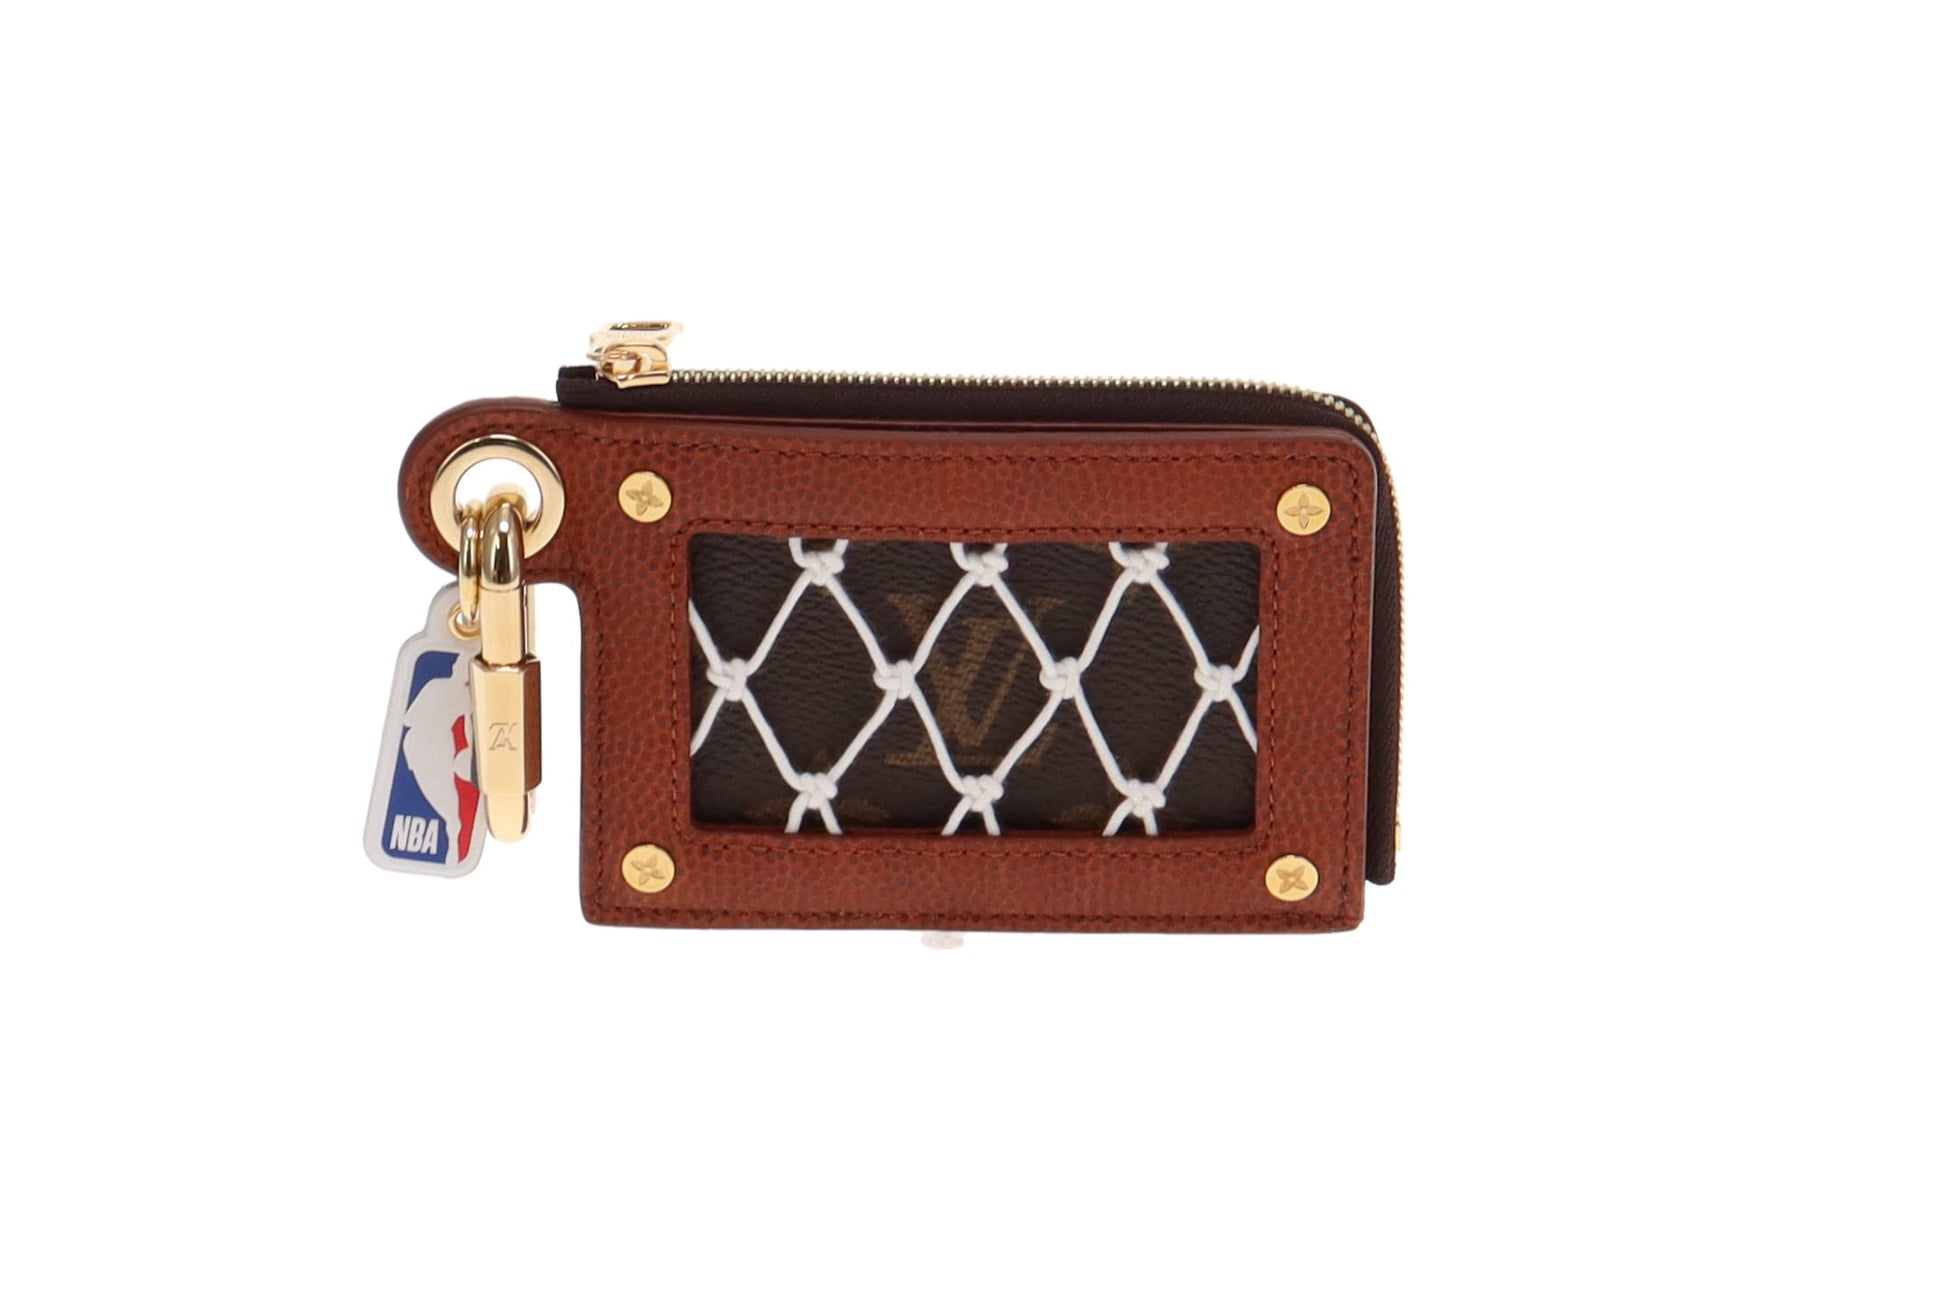 Louis Vuitton x NBA Backpack Trunk Bag Charm & Pouch Mini Monogram Brown in  Leather with Gold-toneLouis Vuitton x NBA Backpack Trunk Bag Charm & Pouch  Mini Monogram Brown in Leather with